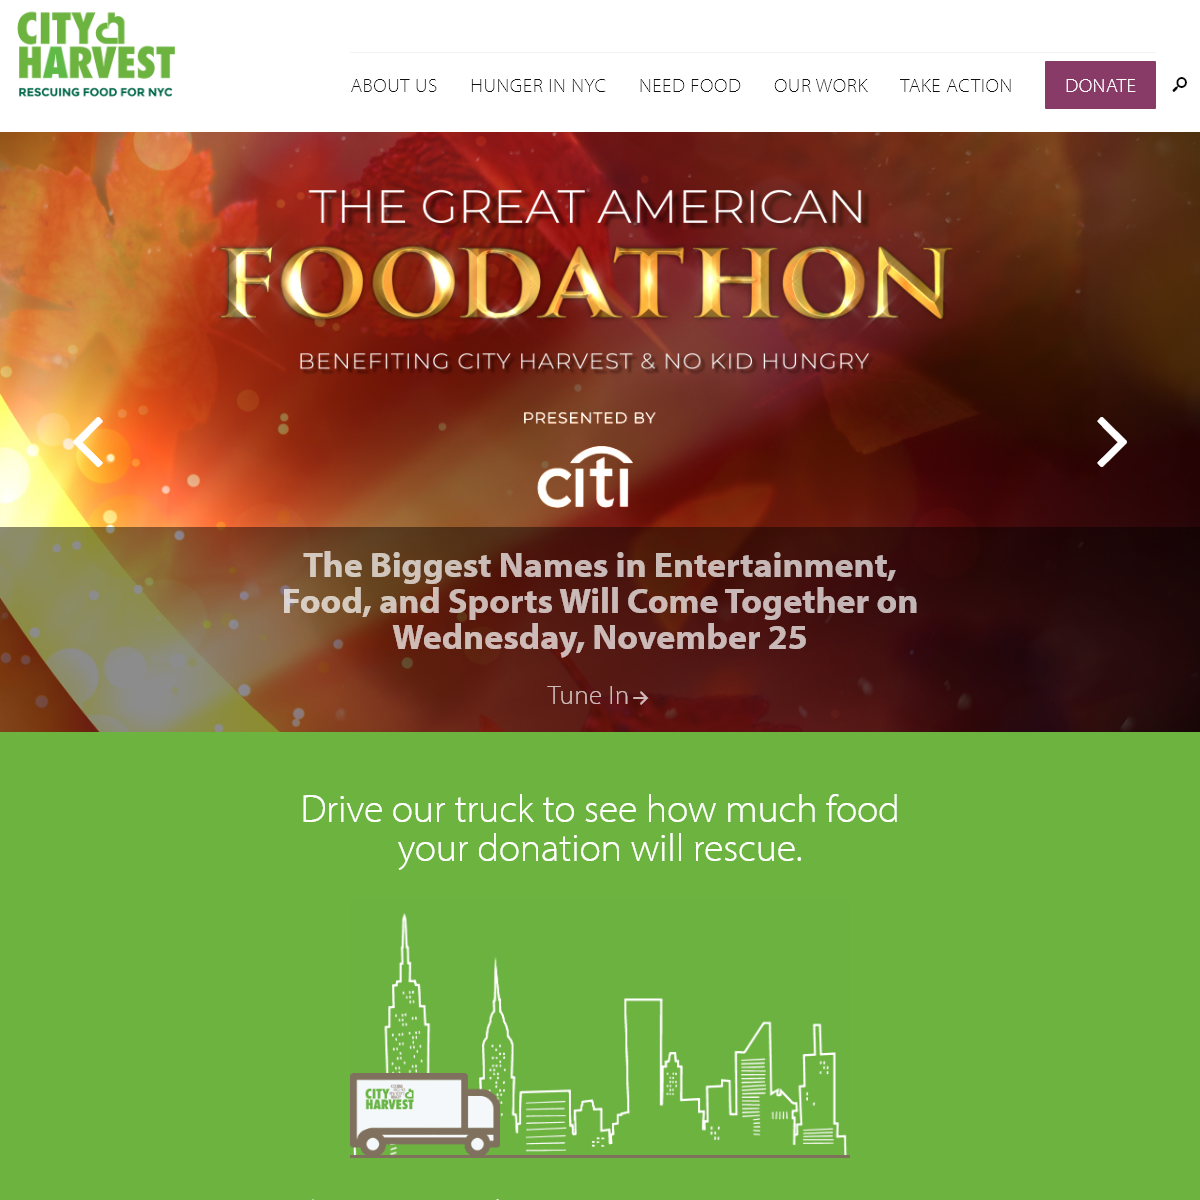 A complete backup of cityharvest.org